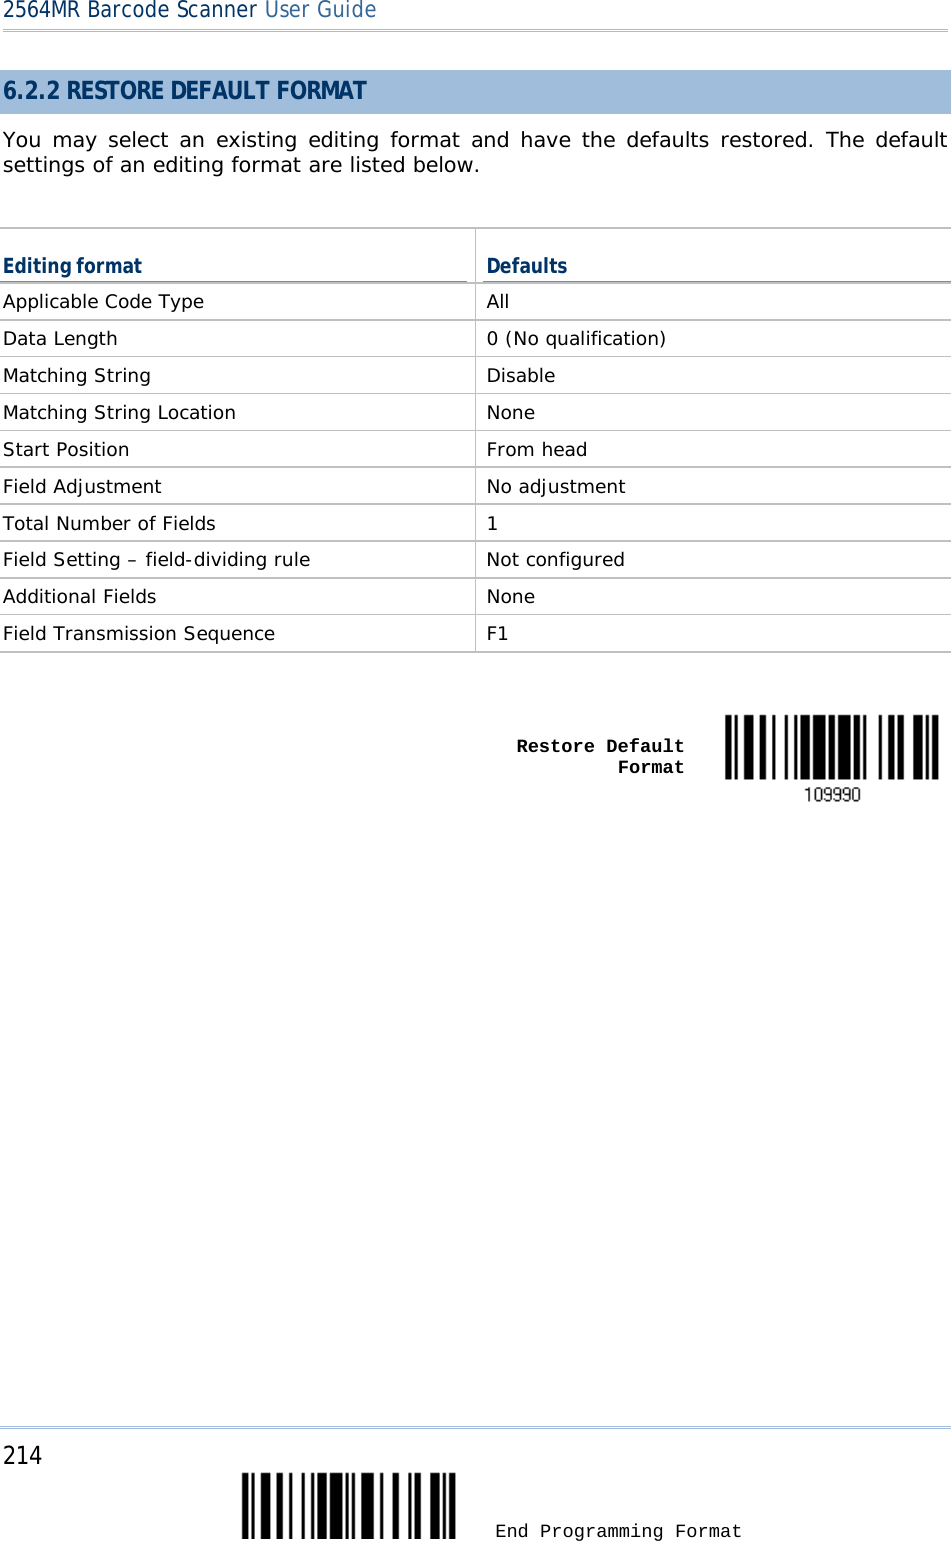 2564MR Barcode Scanner User Guide  6.2.2 RESTORE DEFAULT FORMAT You may select an existing editing format and have the defaults restored. The default settings of an editing format are listed below.  Editing format Defaults Applicable Code Type All Data Length 0 (No qualification) Matching String Disable Matching String Location None Start Position From head Field Adjustment No adjustment Total Number of Fields  1 Field Setting – field-dividing rule Not configured Additional Fields None Field Transmission Sequence F1     Restore Default Format         214  End Programming Format 